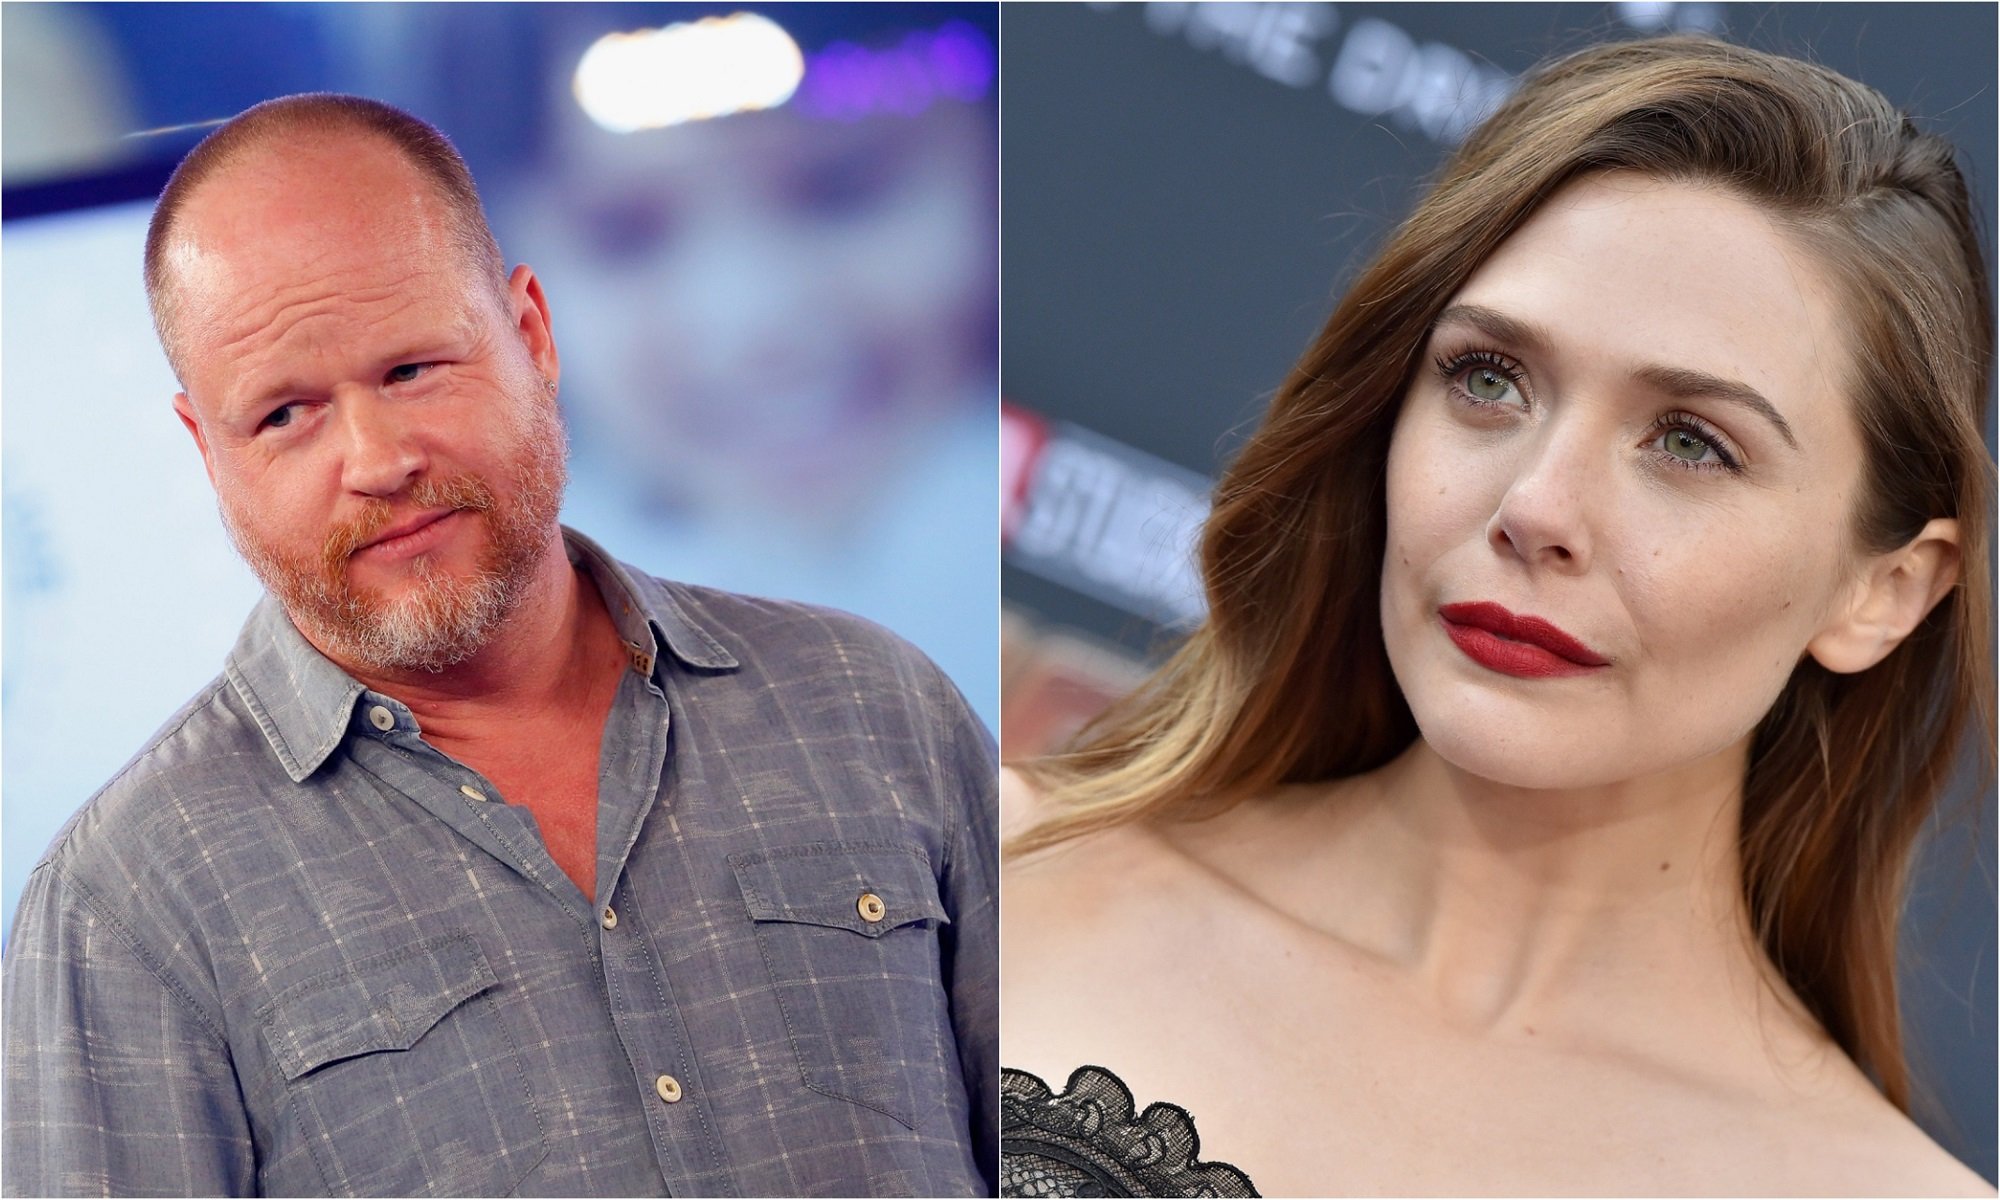 Joss Whedon during MTV Total Registration Live in 2016 and Elizabeth Olsen at the 'Avengers: Infinity War' premiere in 2018'